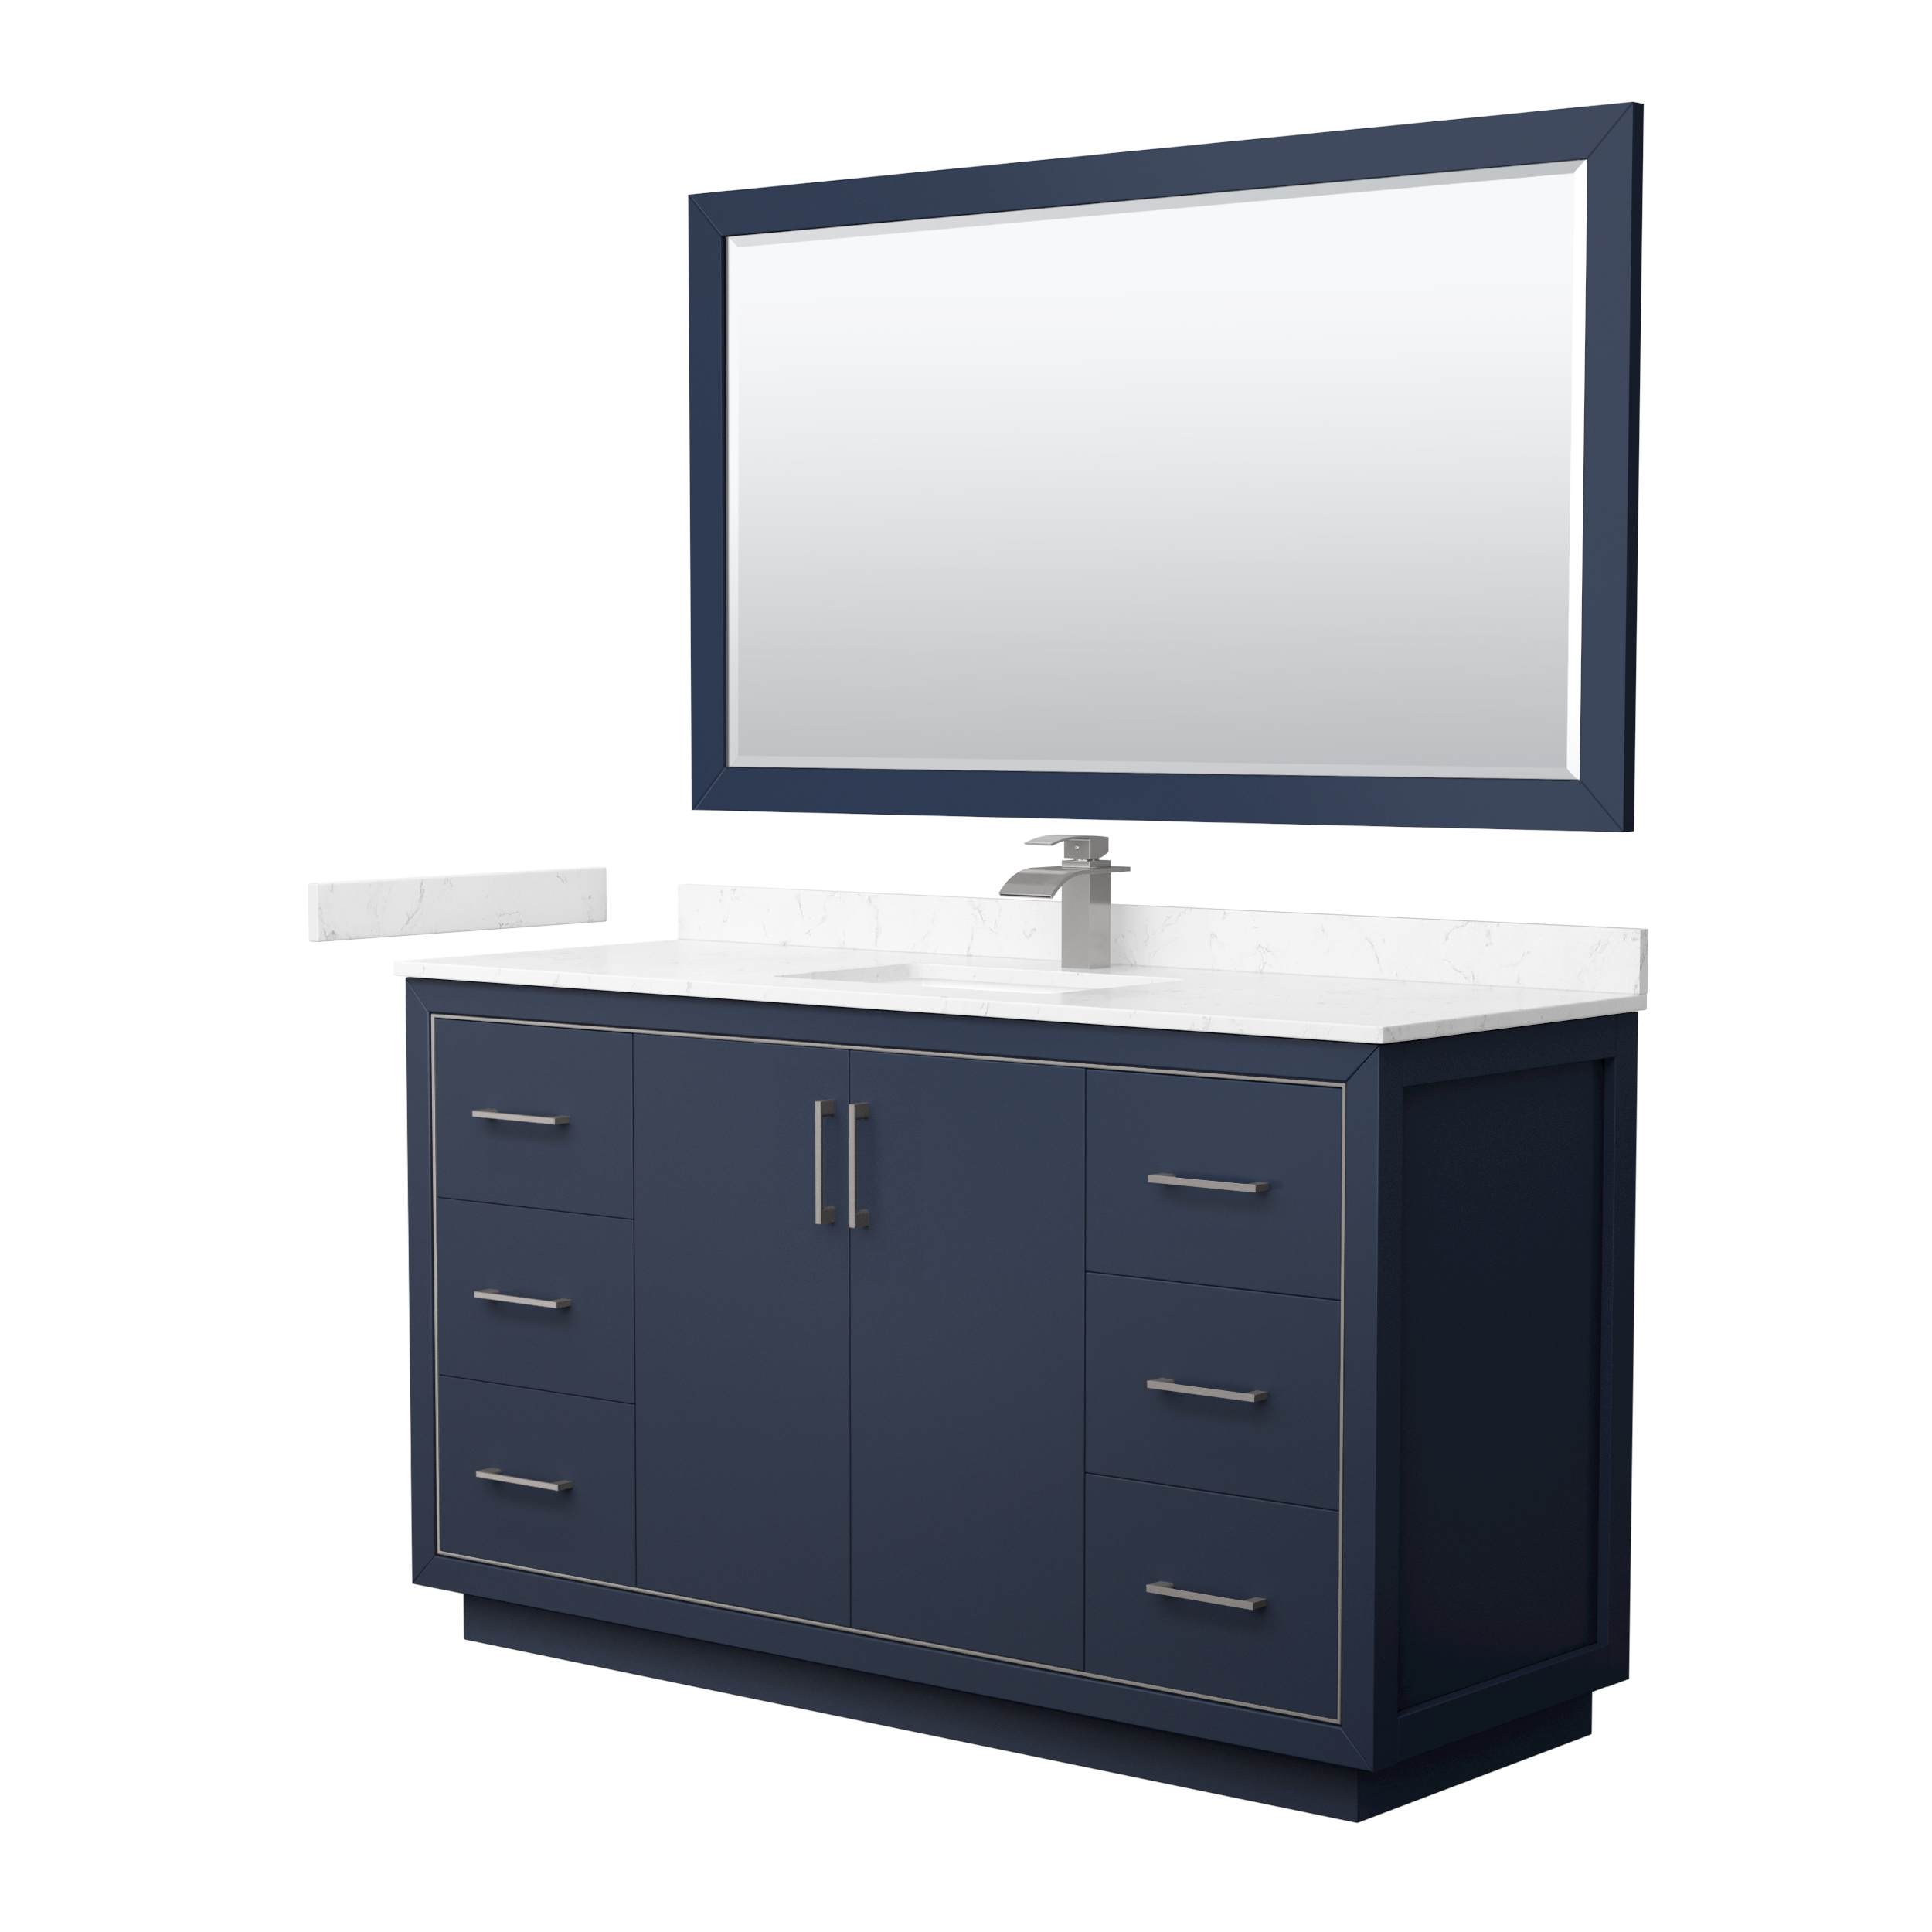 60" Single Bathroom Vanity with 4 Color Options, 3 Countertop Options, 3 Hardware Options and Mirror Option